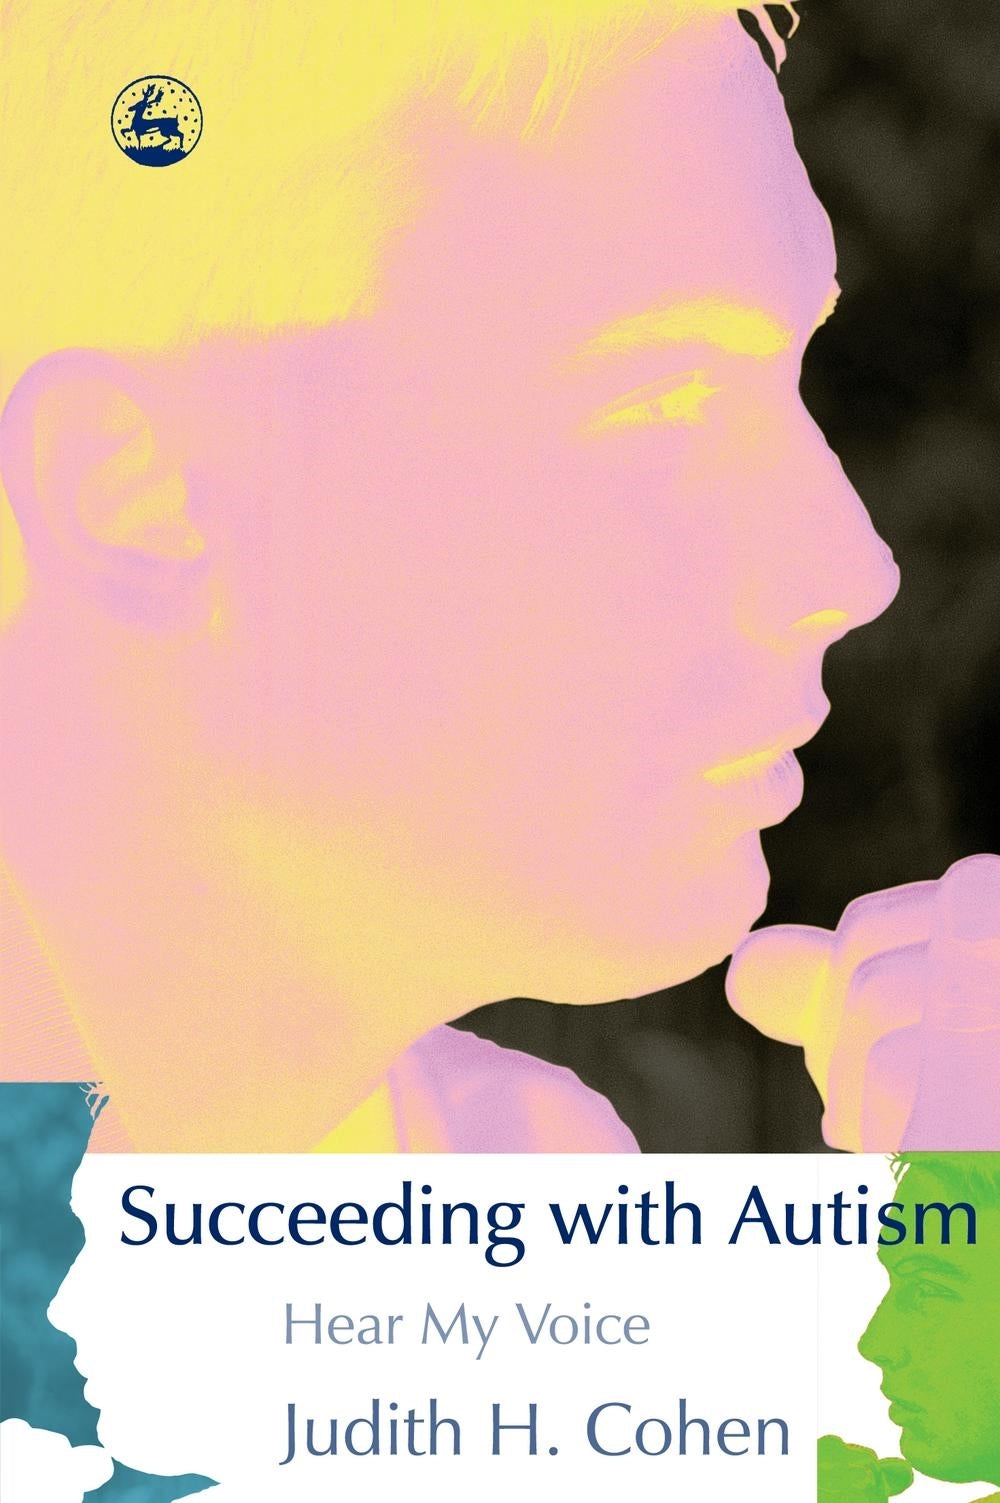 Succeeding with Autism by Judith Cohen